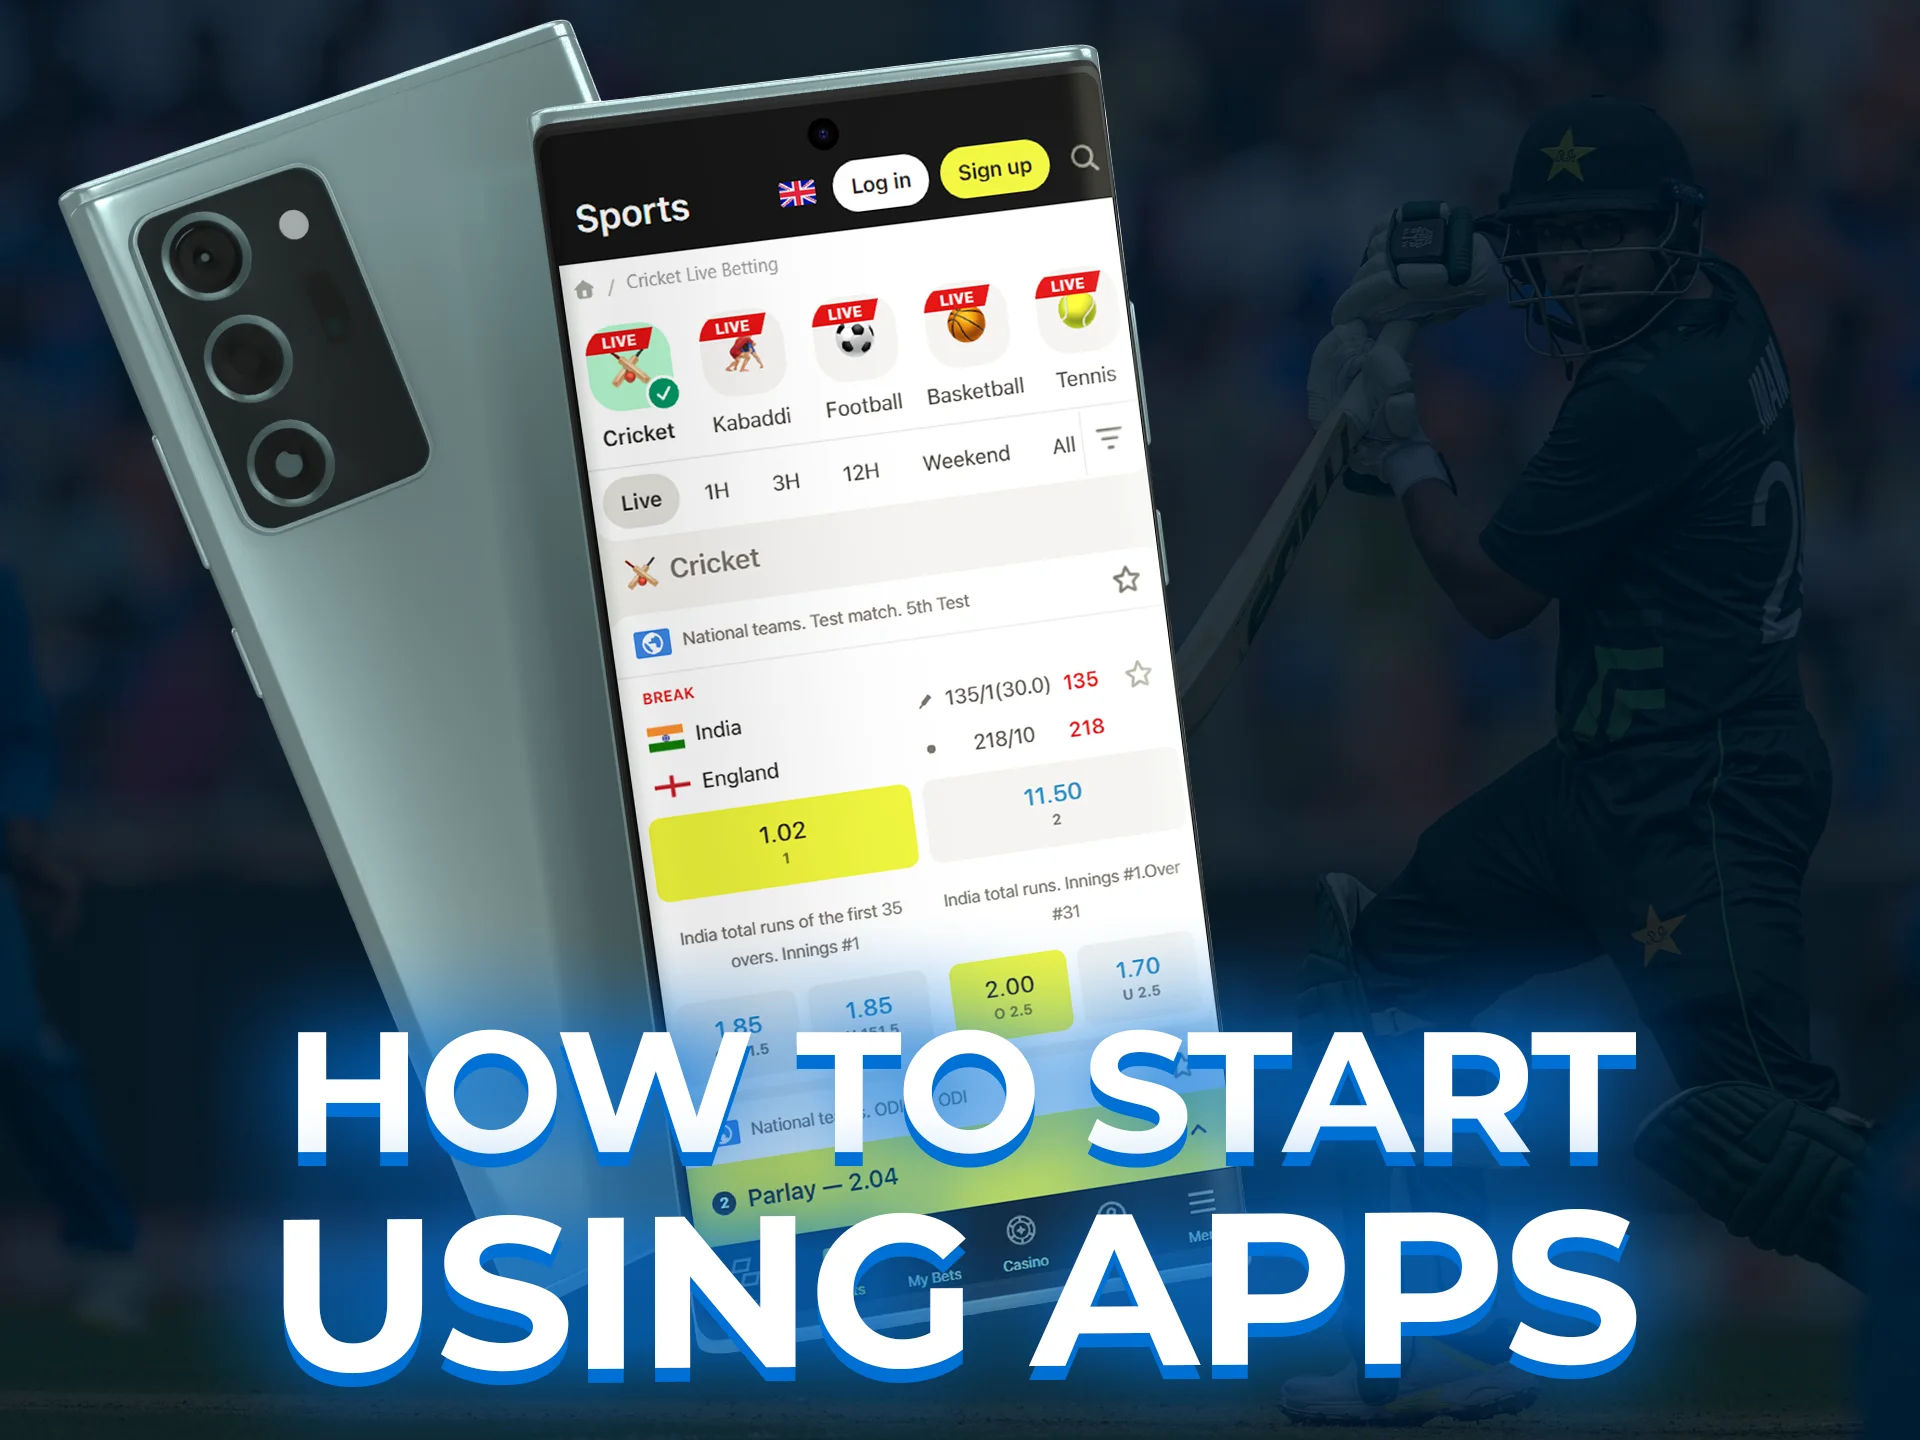 Install cricket betting apps on your phone, register and place a bet.